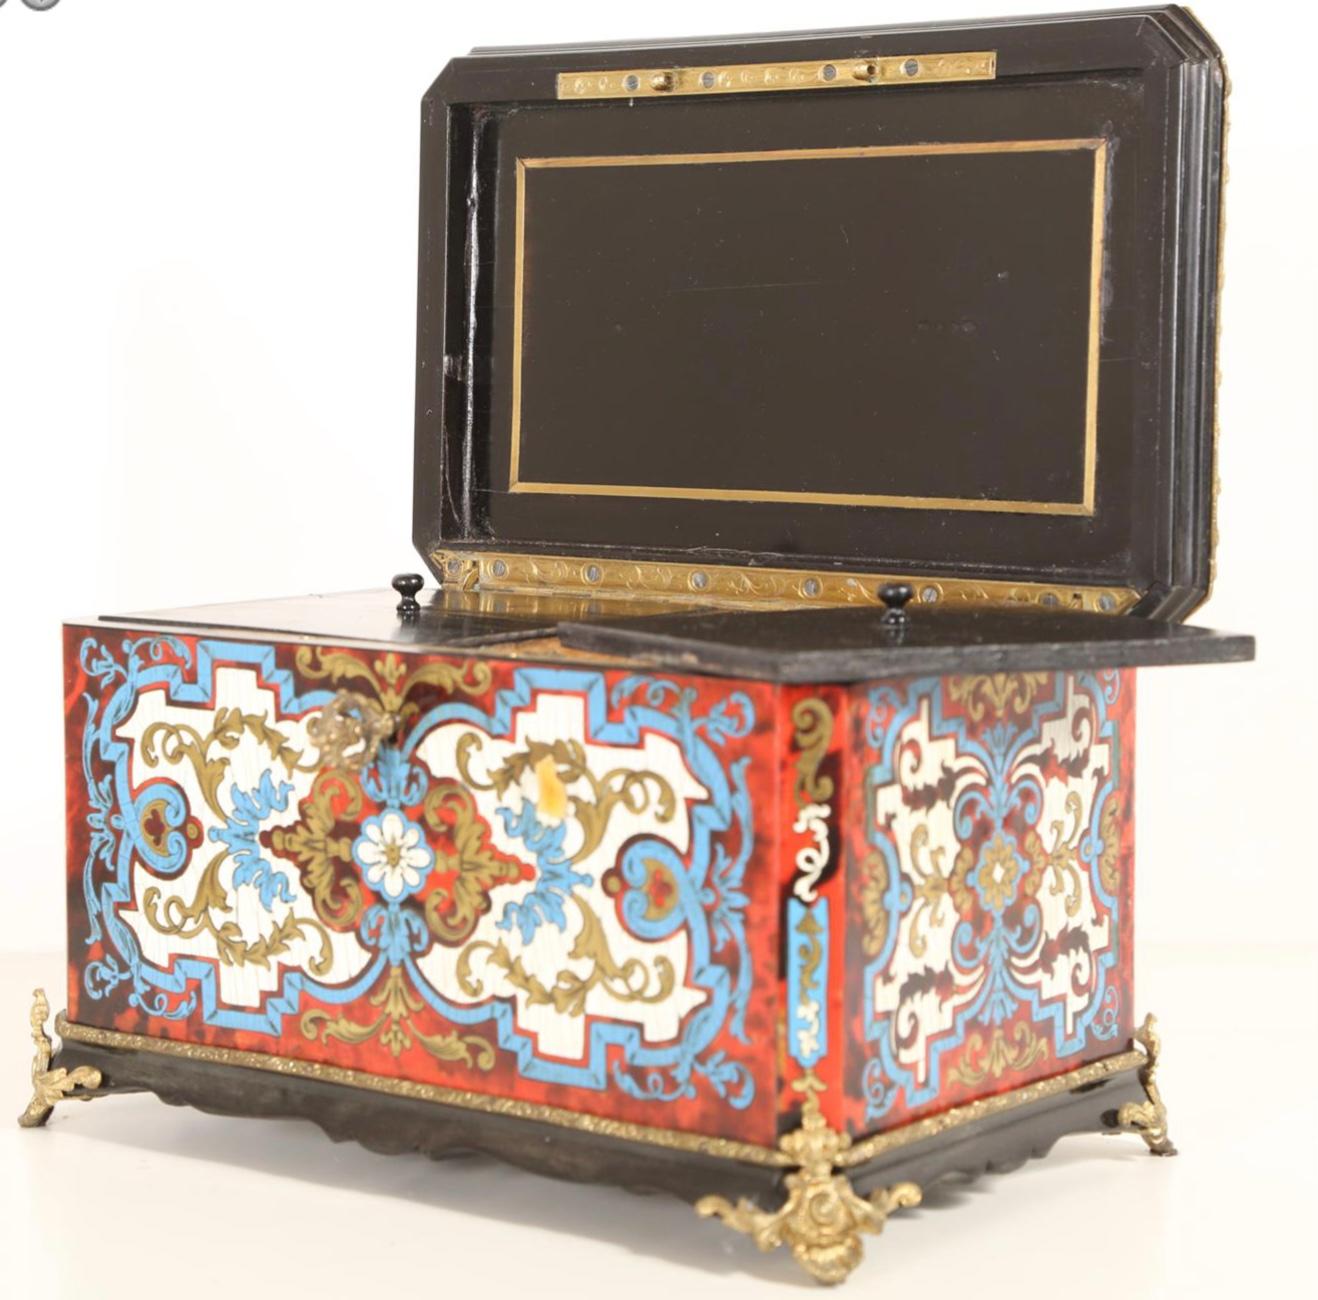 Rare 19th Century French Boulle, Brass and Tortoiseshell Tea Caddy. Elaborate boulle work, French tea caddy in rare three color enamel, bronze dore borders and mounts, boulle work on all sides. The wood carcass inlaid with intricately patterned